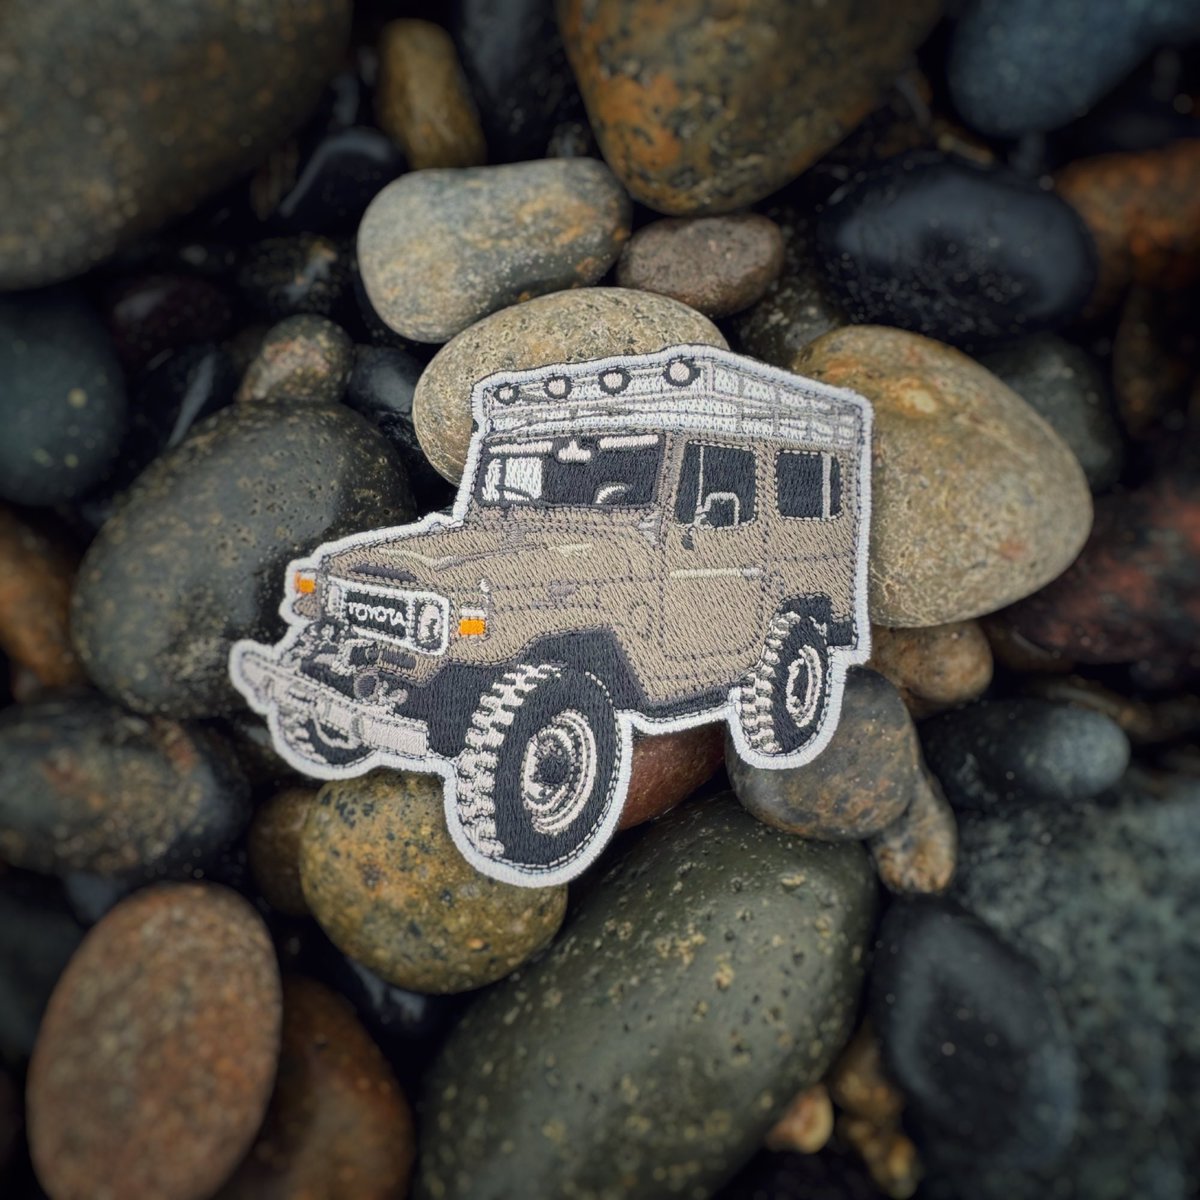 New Adventure Mobile Morale Patches and a small restock of the SPD❌Austere Restock are just 2 hours out!

#prometheusdesignwerx #betheoutsider #soon #adventuregear #fj40 #toyotalandcruiser #moralepatch #hookandloop #adventuremobile #austere #specialprojectsdivison